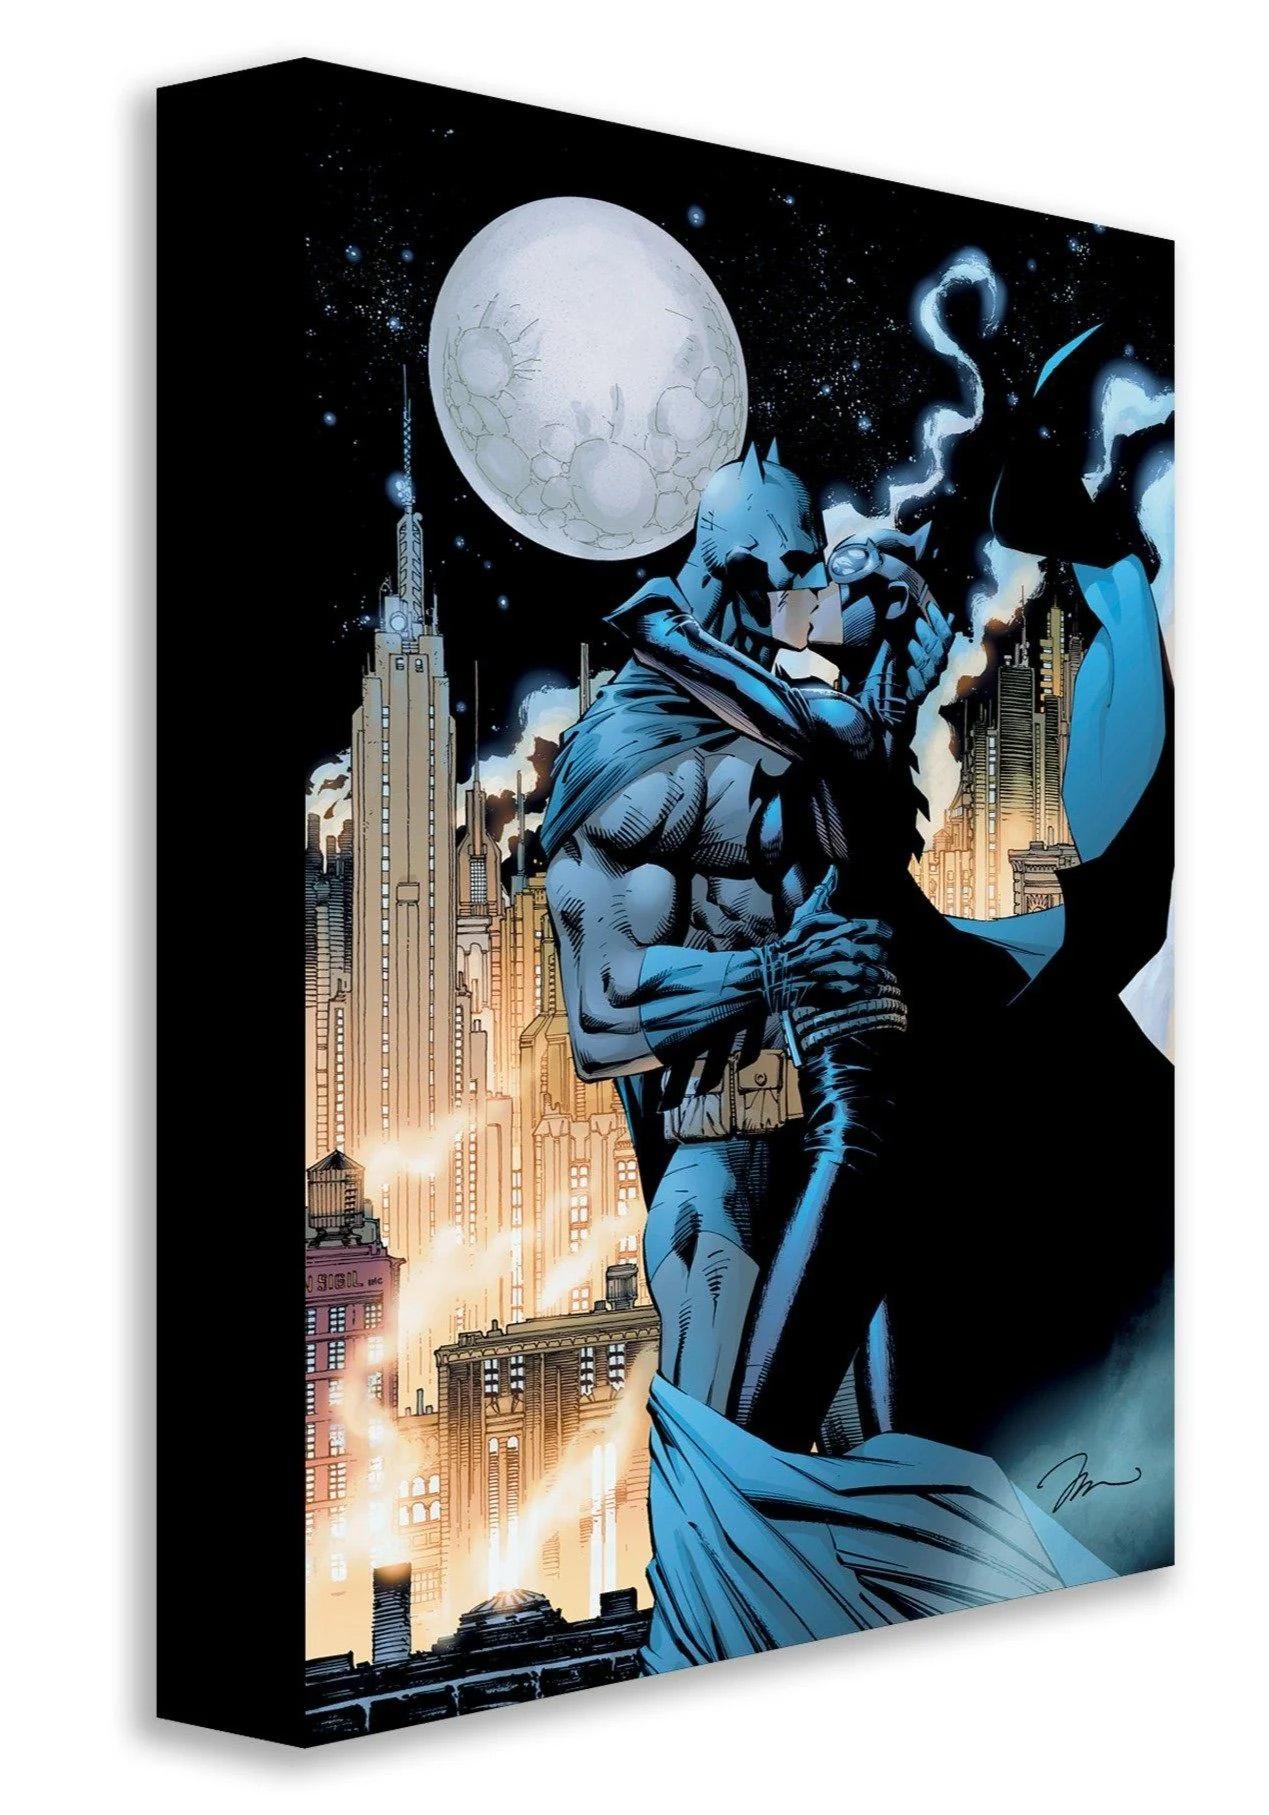 Mighty Mini Collection: Kissing the Knight - Print by Jim Lee